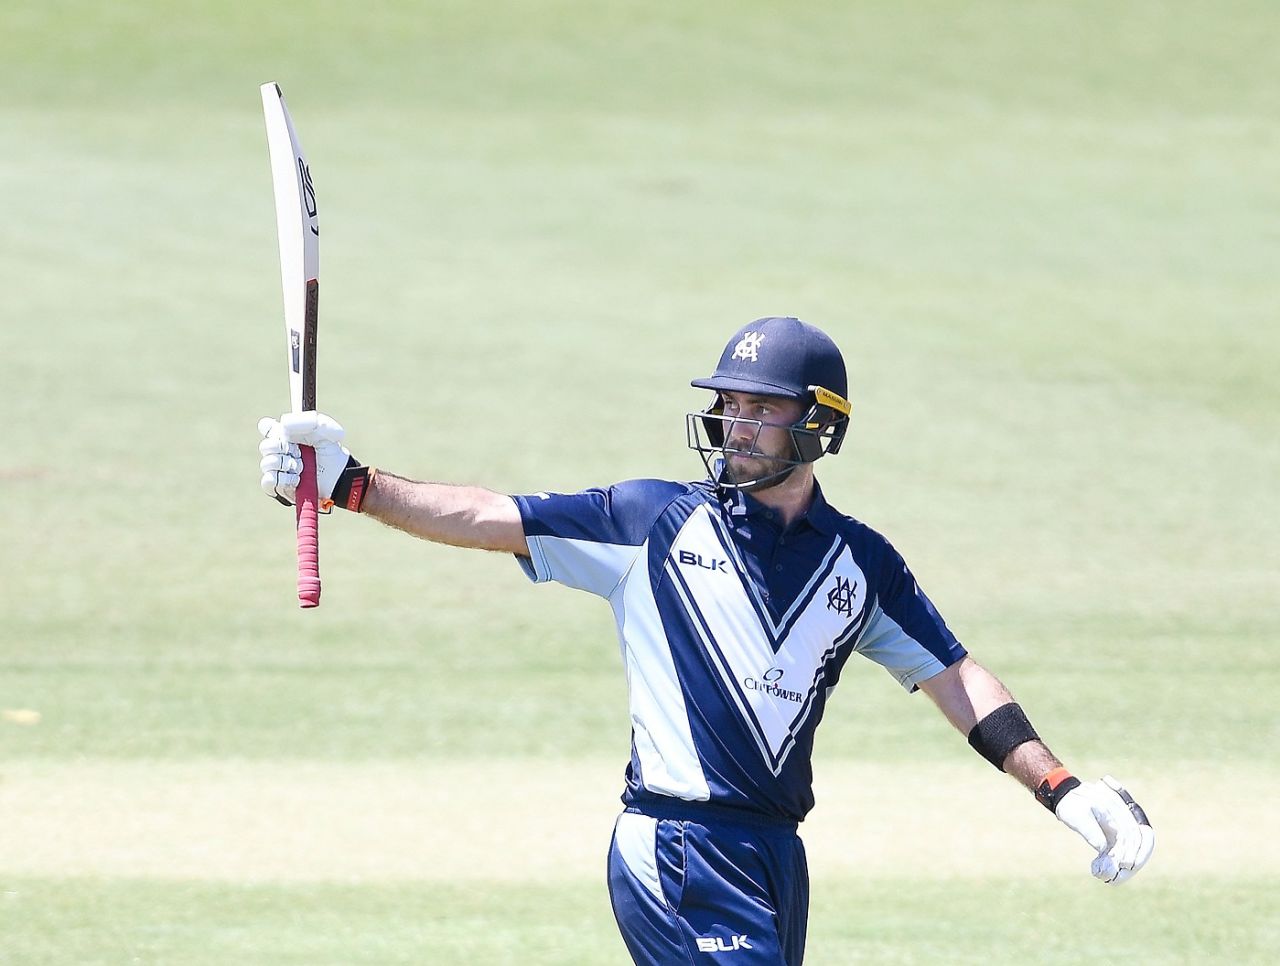 Glenn Maxwell raises his bat after getting to a fifty, Queensland v Victoria, JLT Cup 2018, Townsville,, September 16, 2018